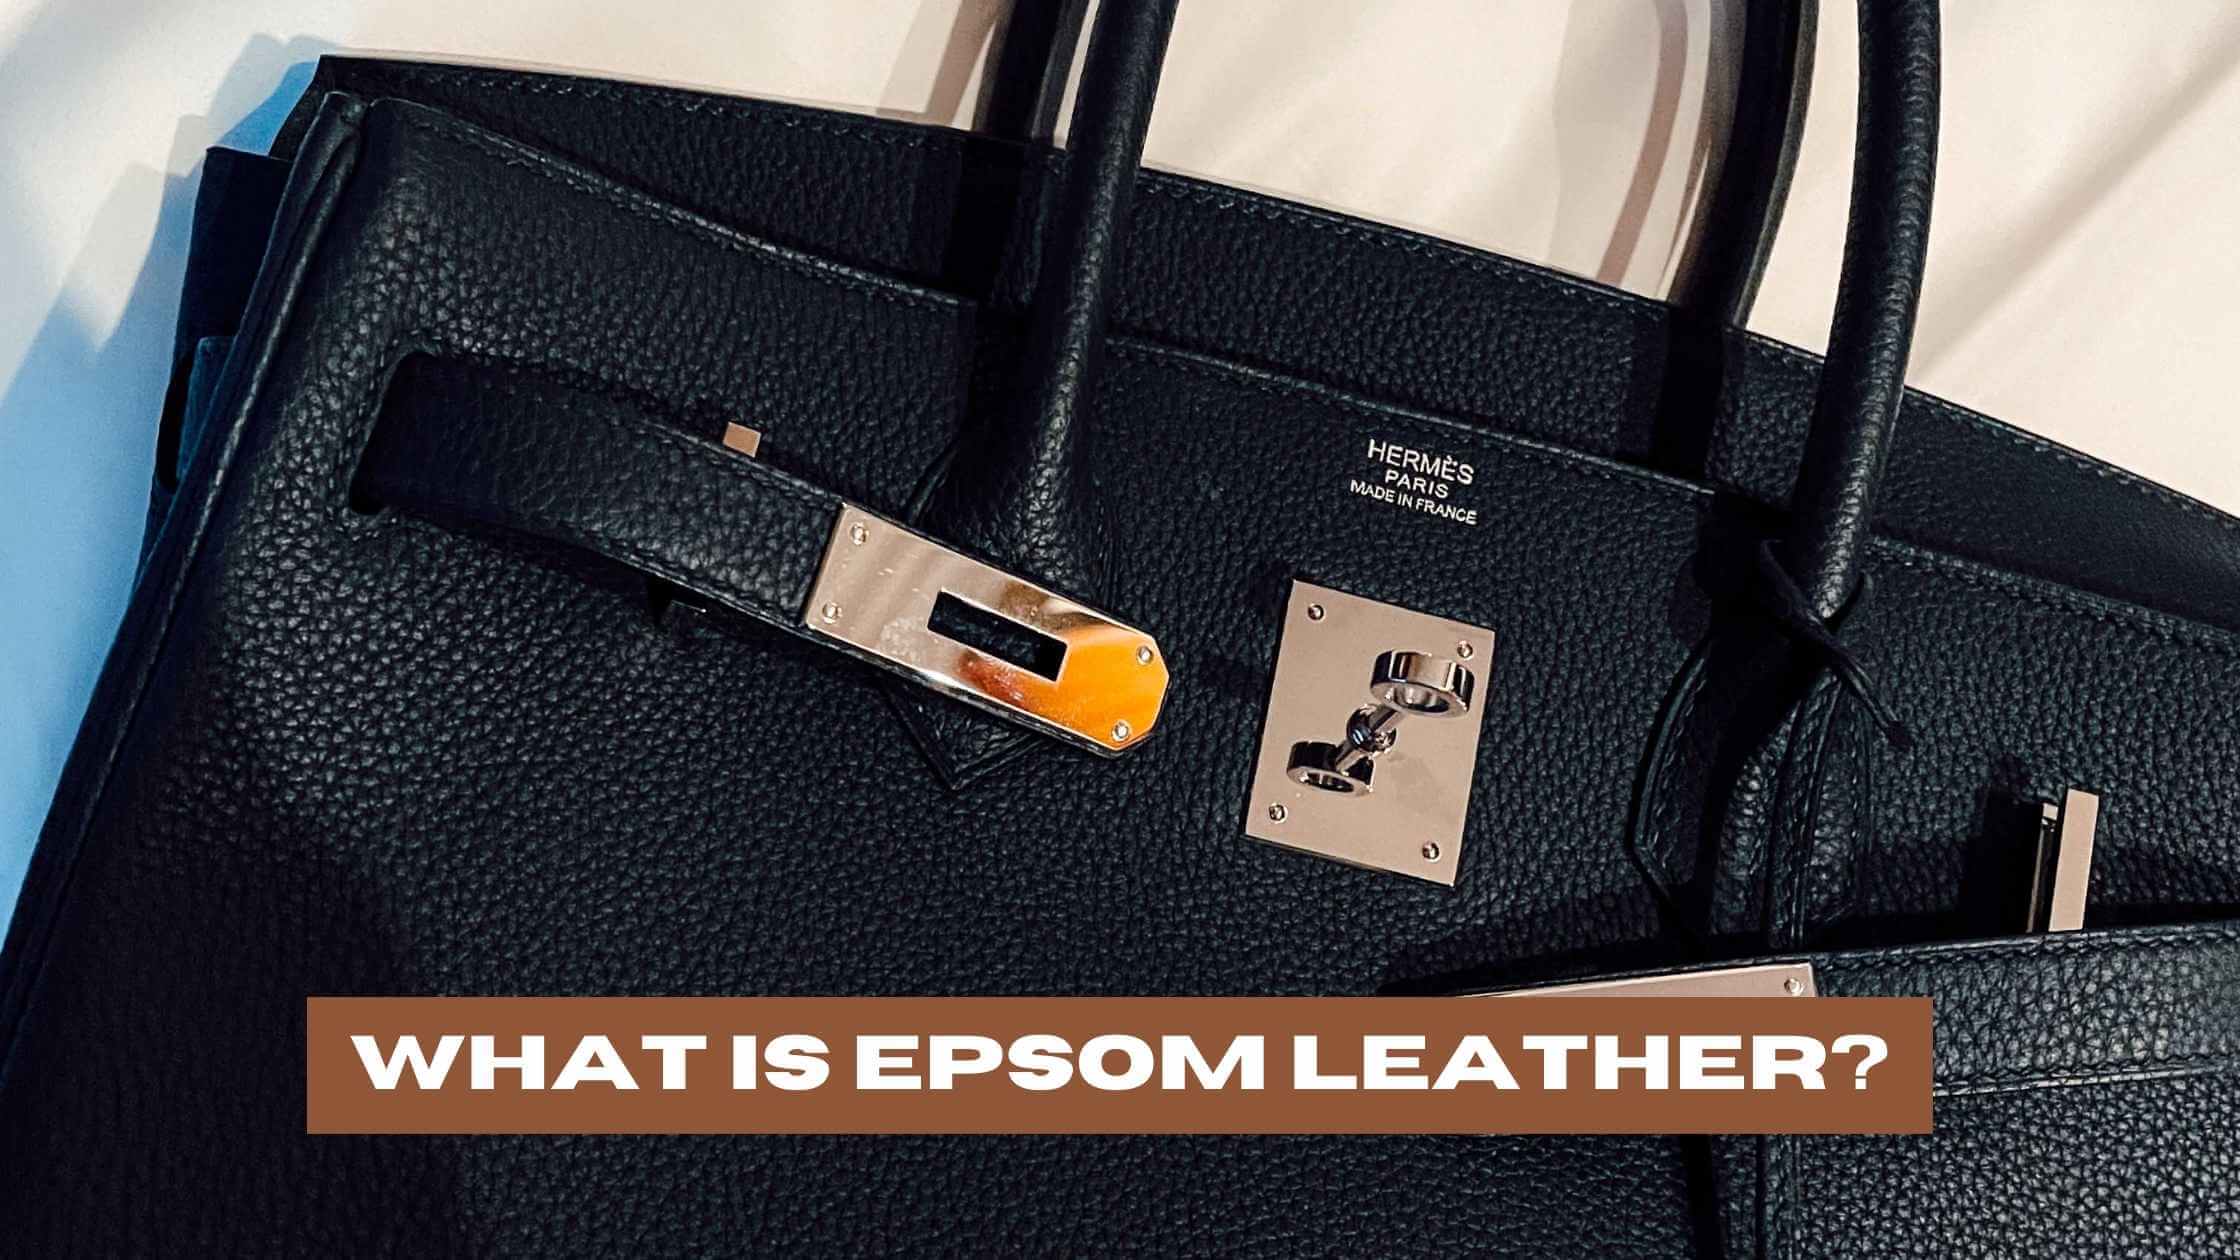 What is Epsom leather